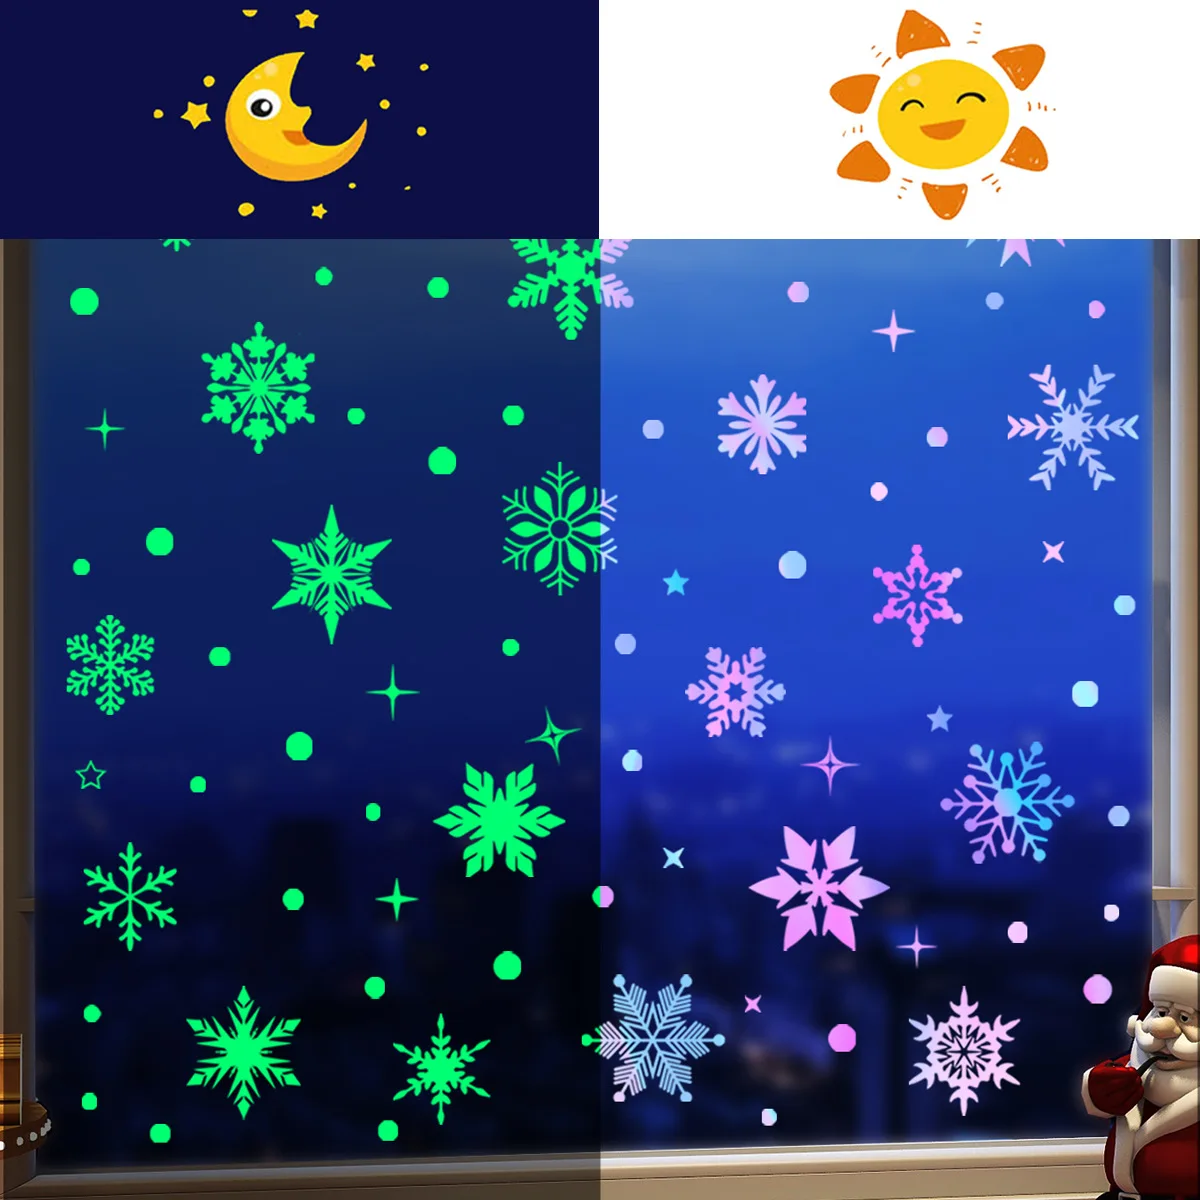 3pcs Colorful Luminous Snowflake Wall Stickers Glass Window Decorative Wall Stickers Christmas Wall Stickers Wallpapers Jdx8015 3 sheets pack gilding pet stickers time and moonlight gem church window diy decorative stickers for handbooks ledger journal